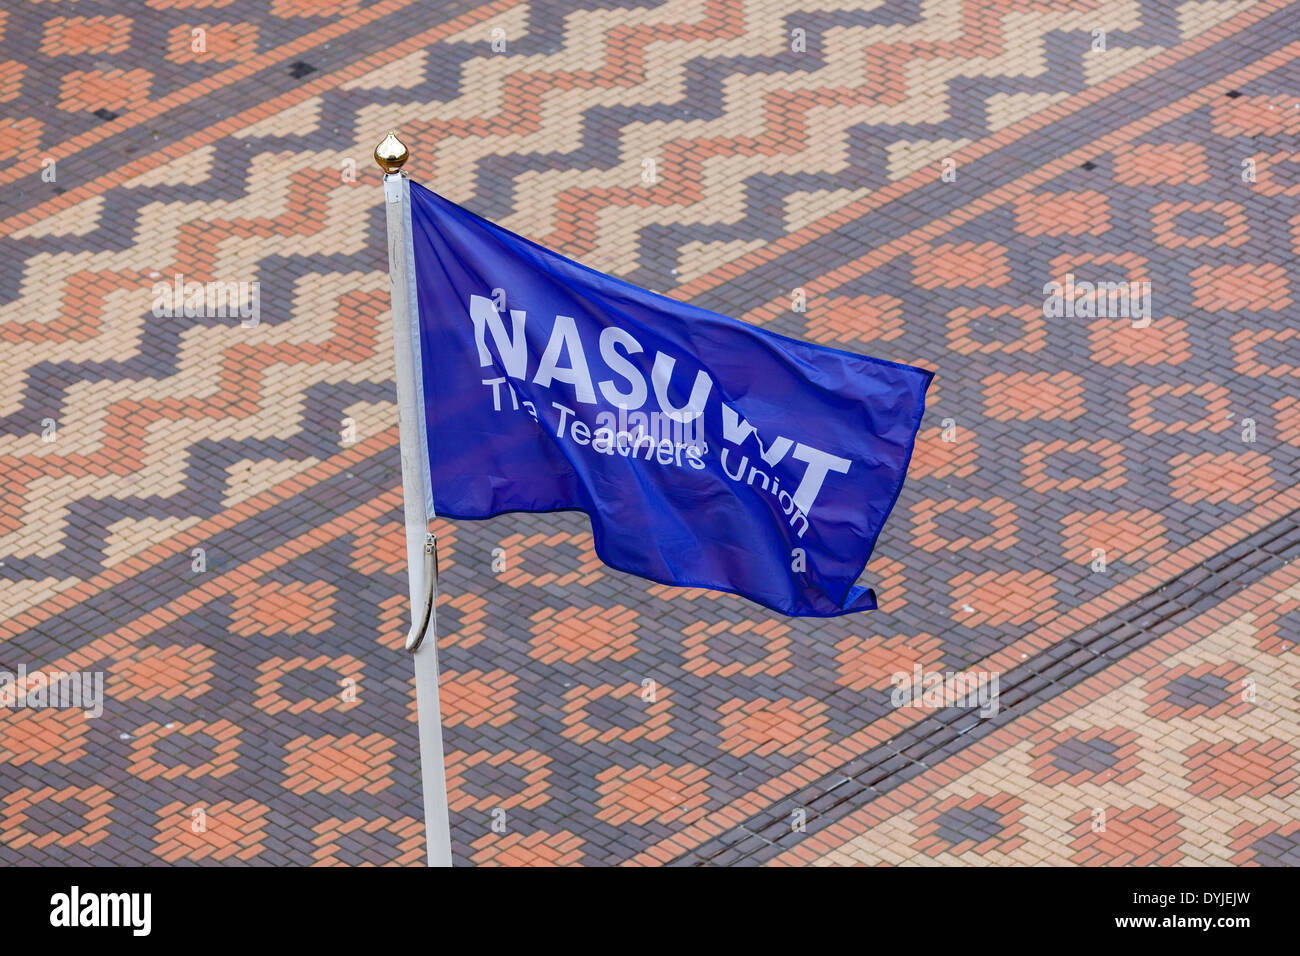 Birmingham UK 19th April 2014. The NASUWT flag flying in Birmingham today. The teachers' union have been holding their annual conference in the ICC this week. Credit:  Chris Gibson/Alamy Live News Stock Photo